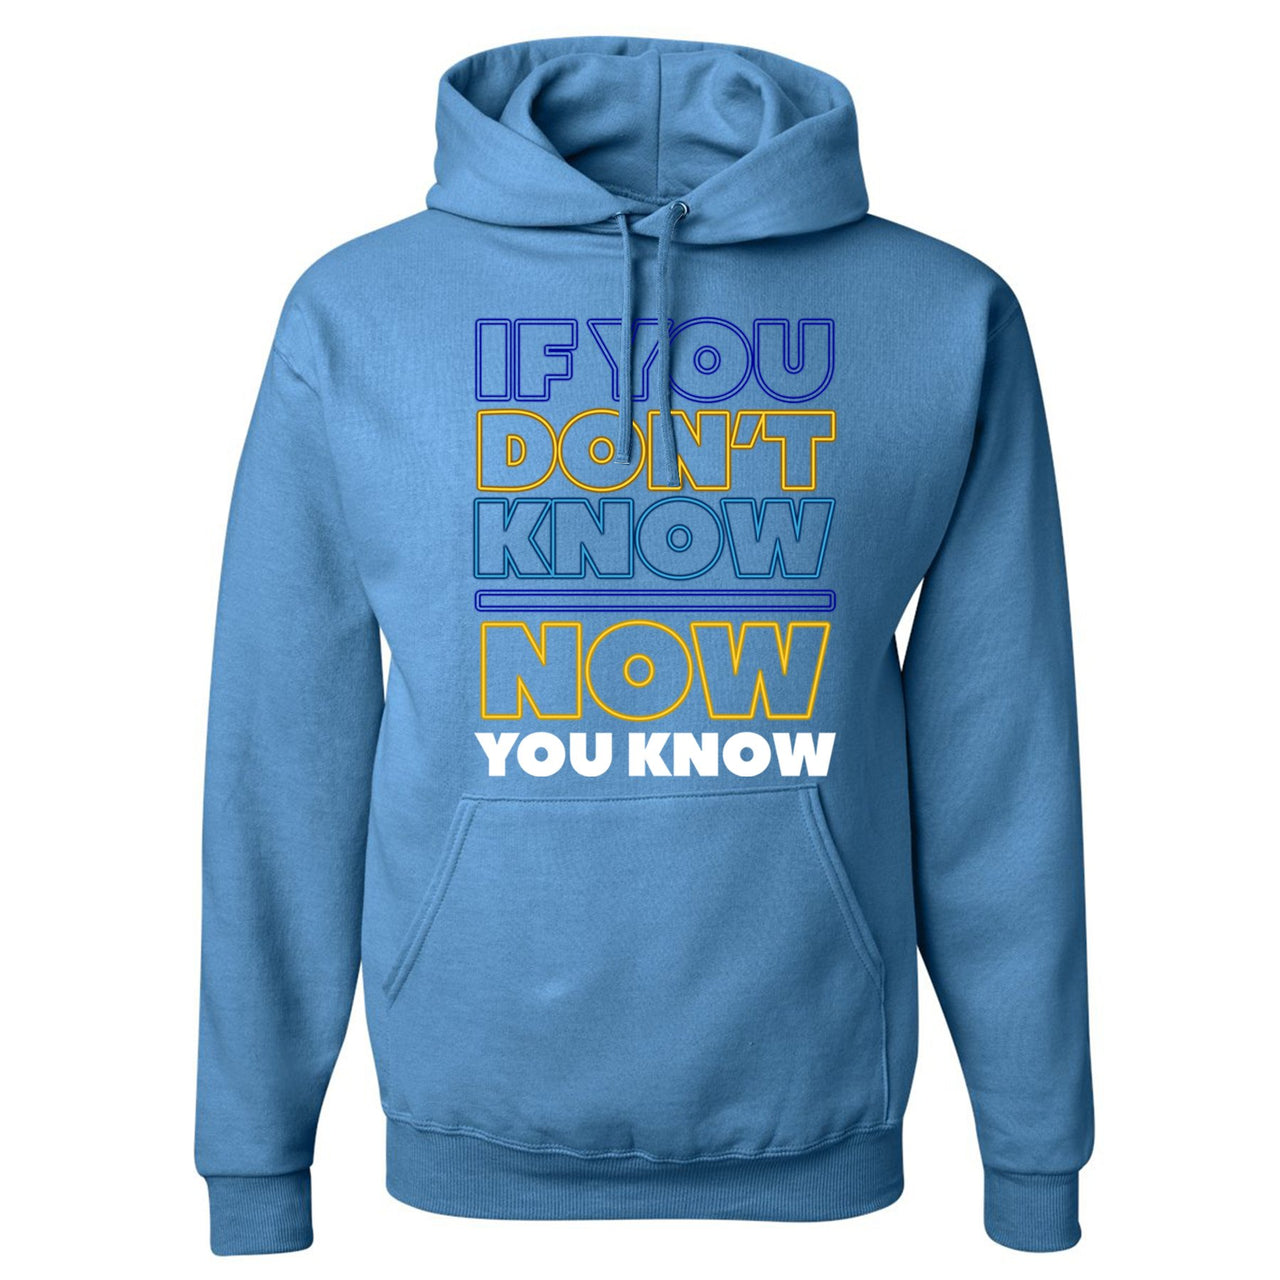 White Aqua 8s Hoodie | If You Don't Know Now You Know, Columbia Blue